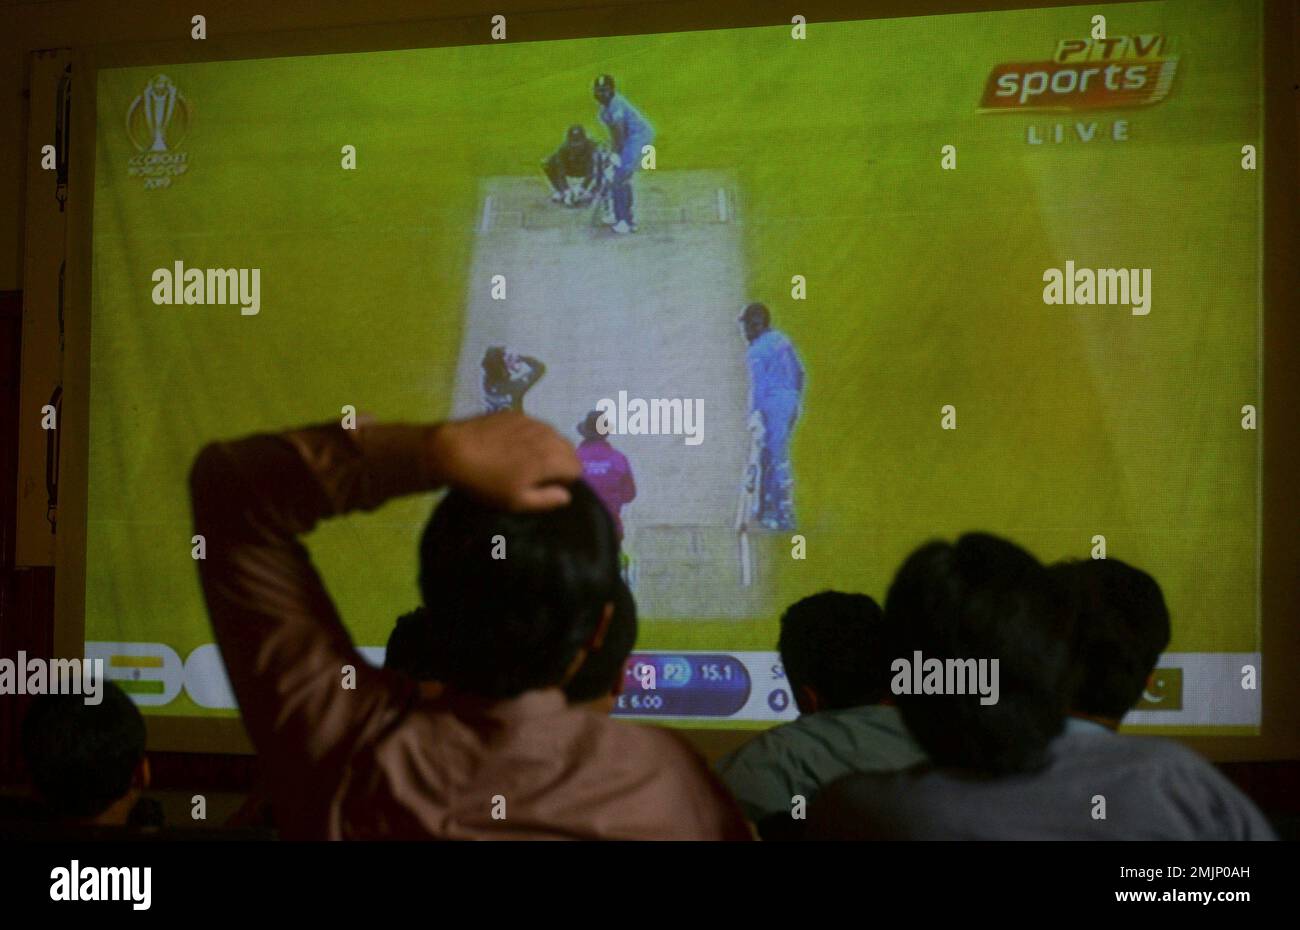 People watch the cricket World Cup match between Pakistan and India, on a big screen in Peshawar, Pakistan, Sunday, June 16, 2019